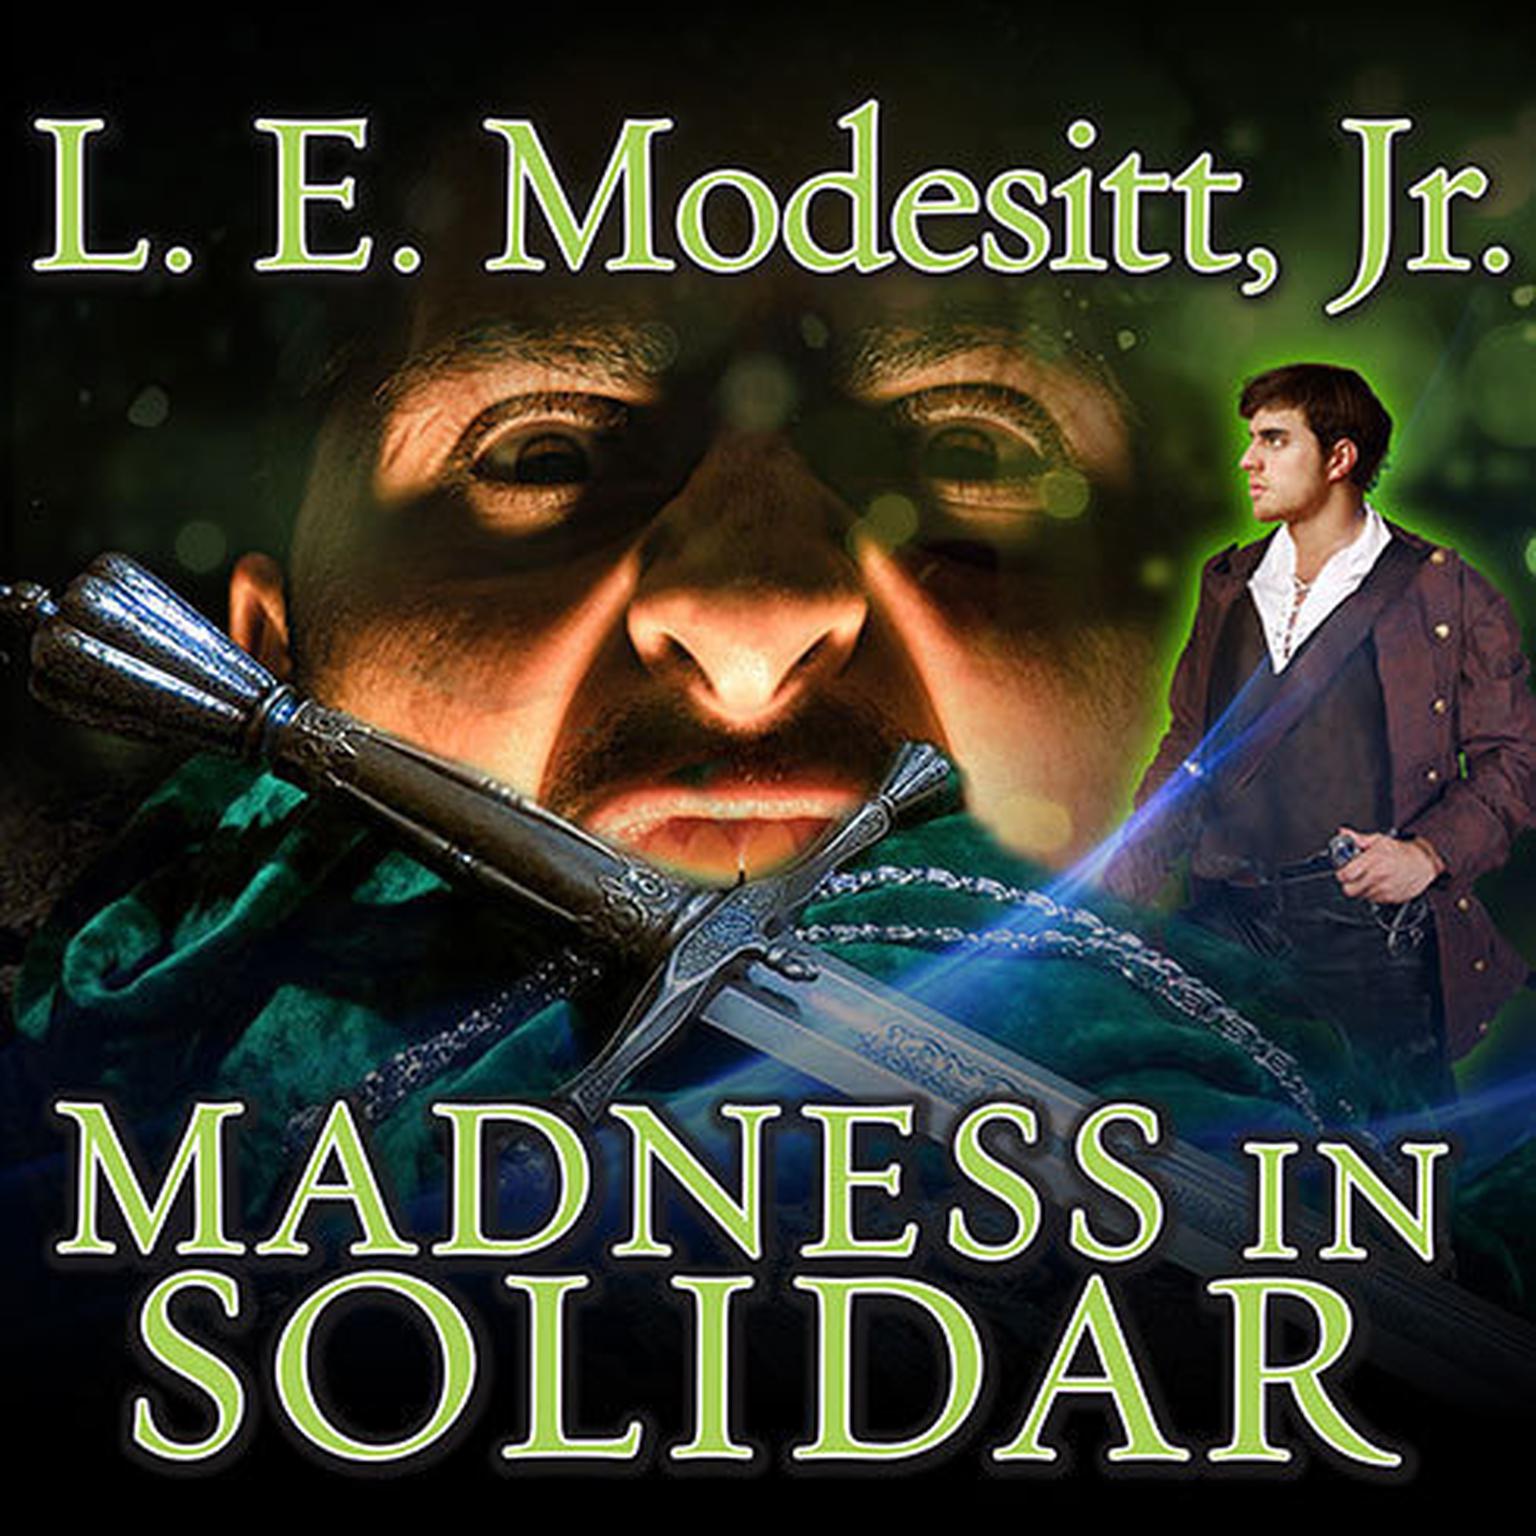 Madness in Solidar Audiobook, by L. E. Modesitt